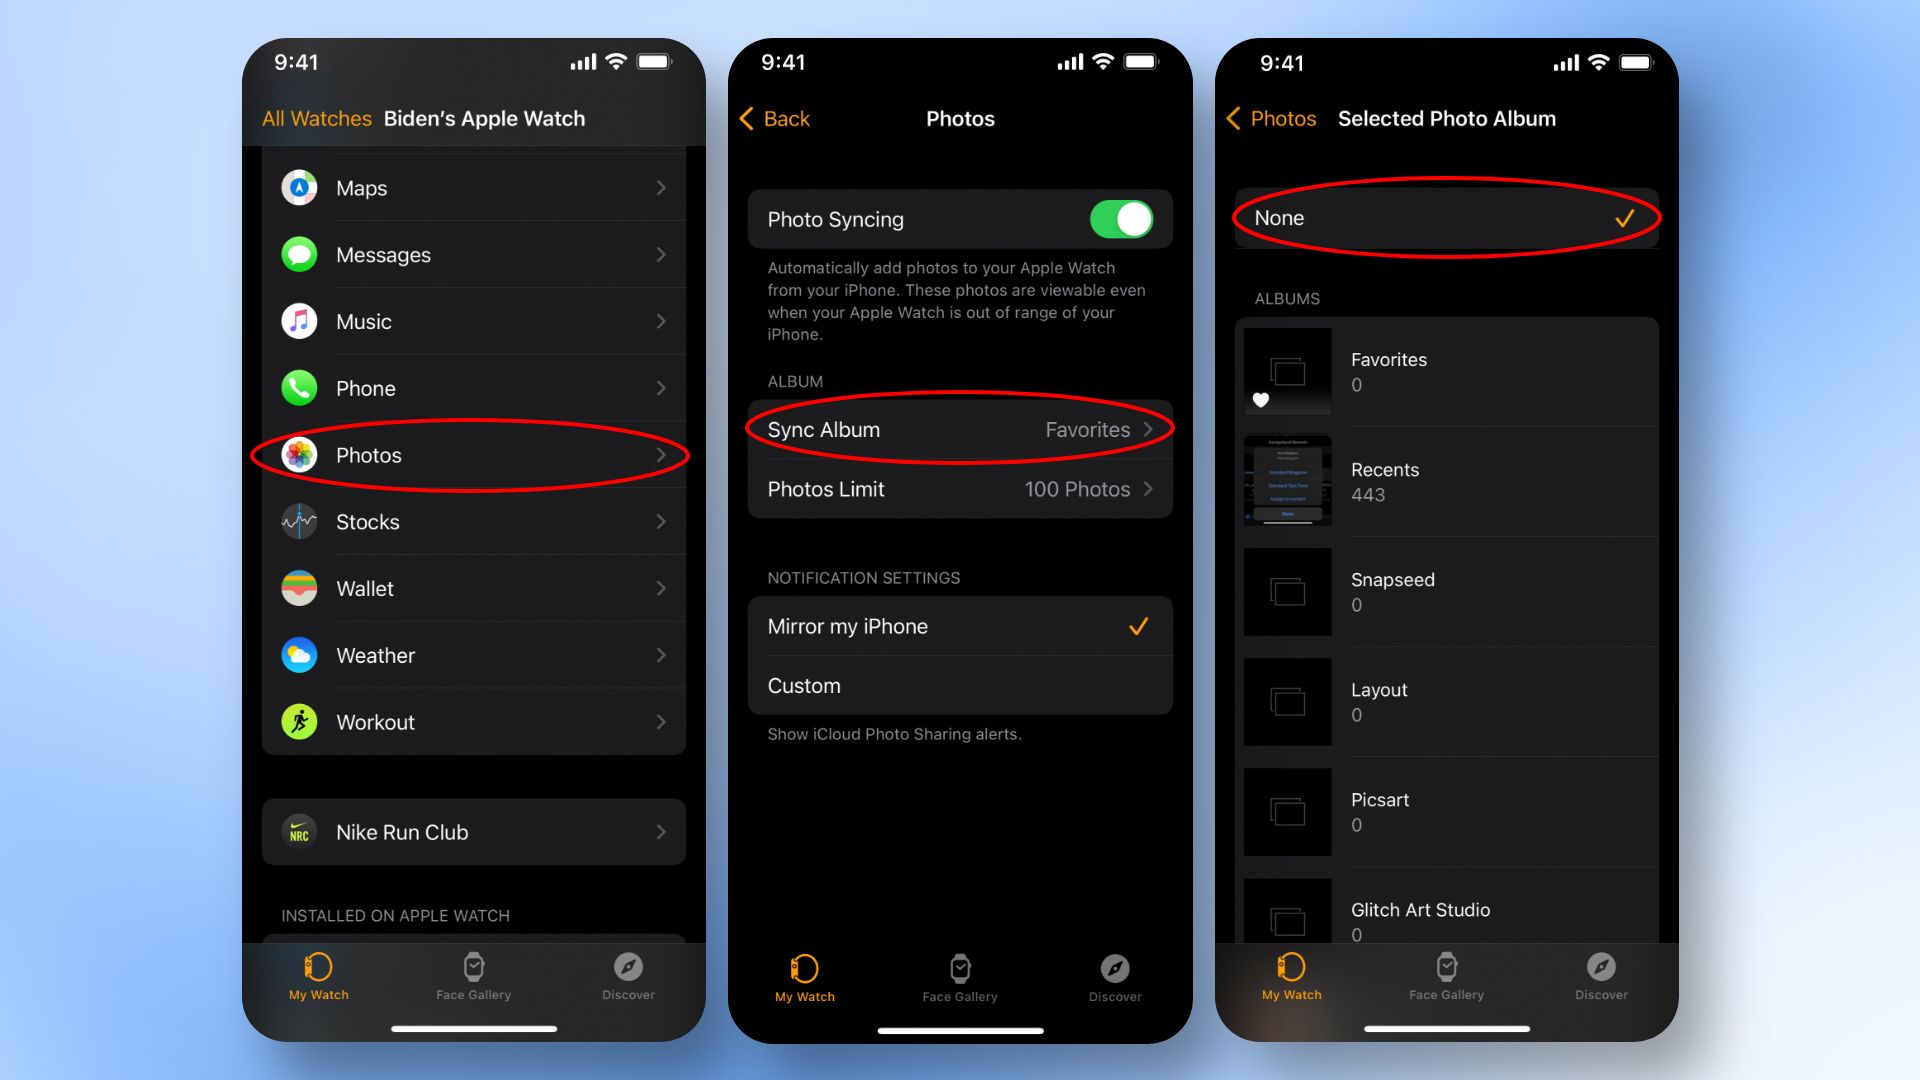 Here’s how to remove photos from Apple Watch using Photos app